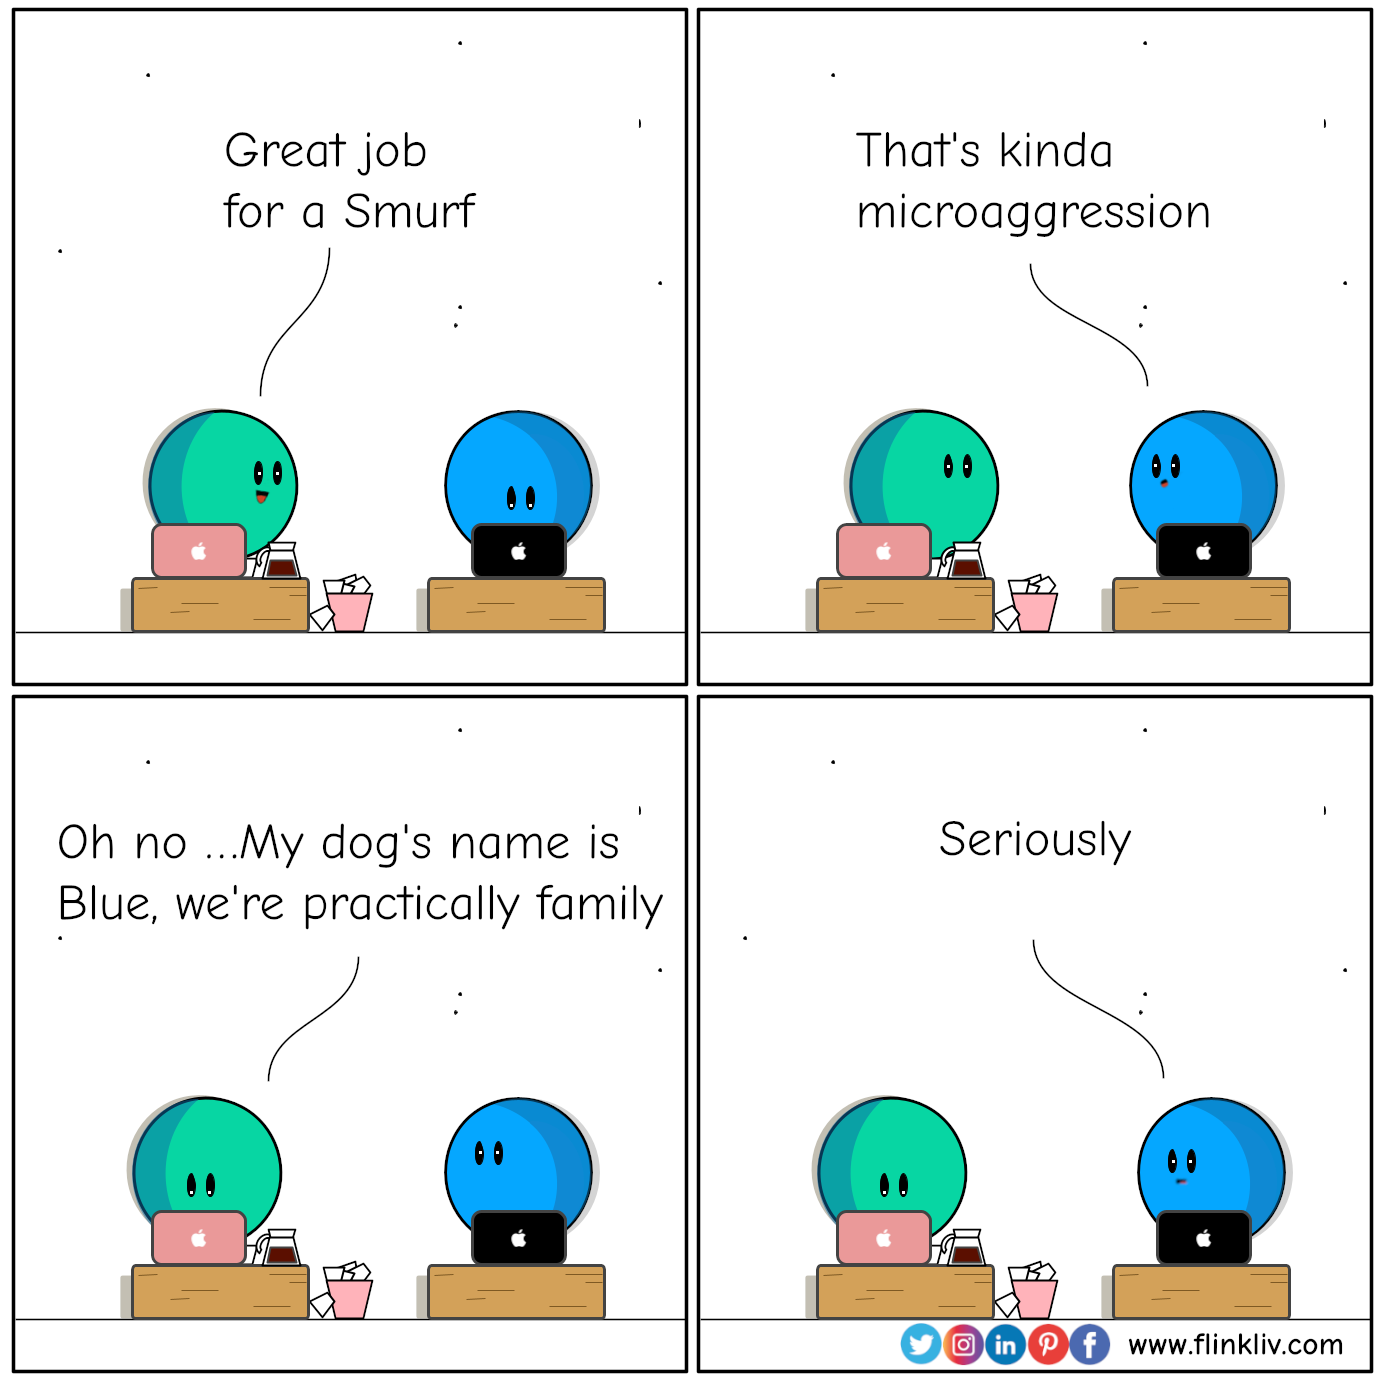 Conversation between A and B about microagresssions 
				A: Great job for a Smurf.
				B: That's kinda microaggression
				A: I’m not racist, I have a blue friend
				My dog's name is Blue, we're practically family
				B: Seriously
				By Flinkliv.com

            